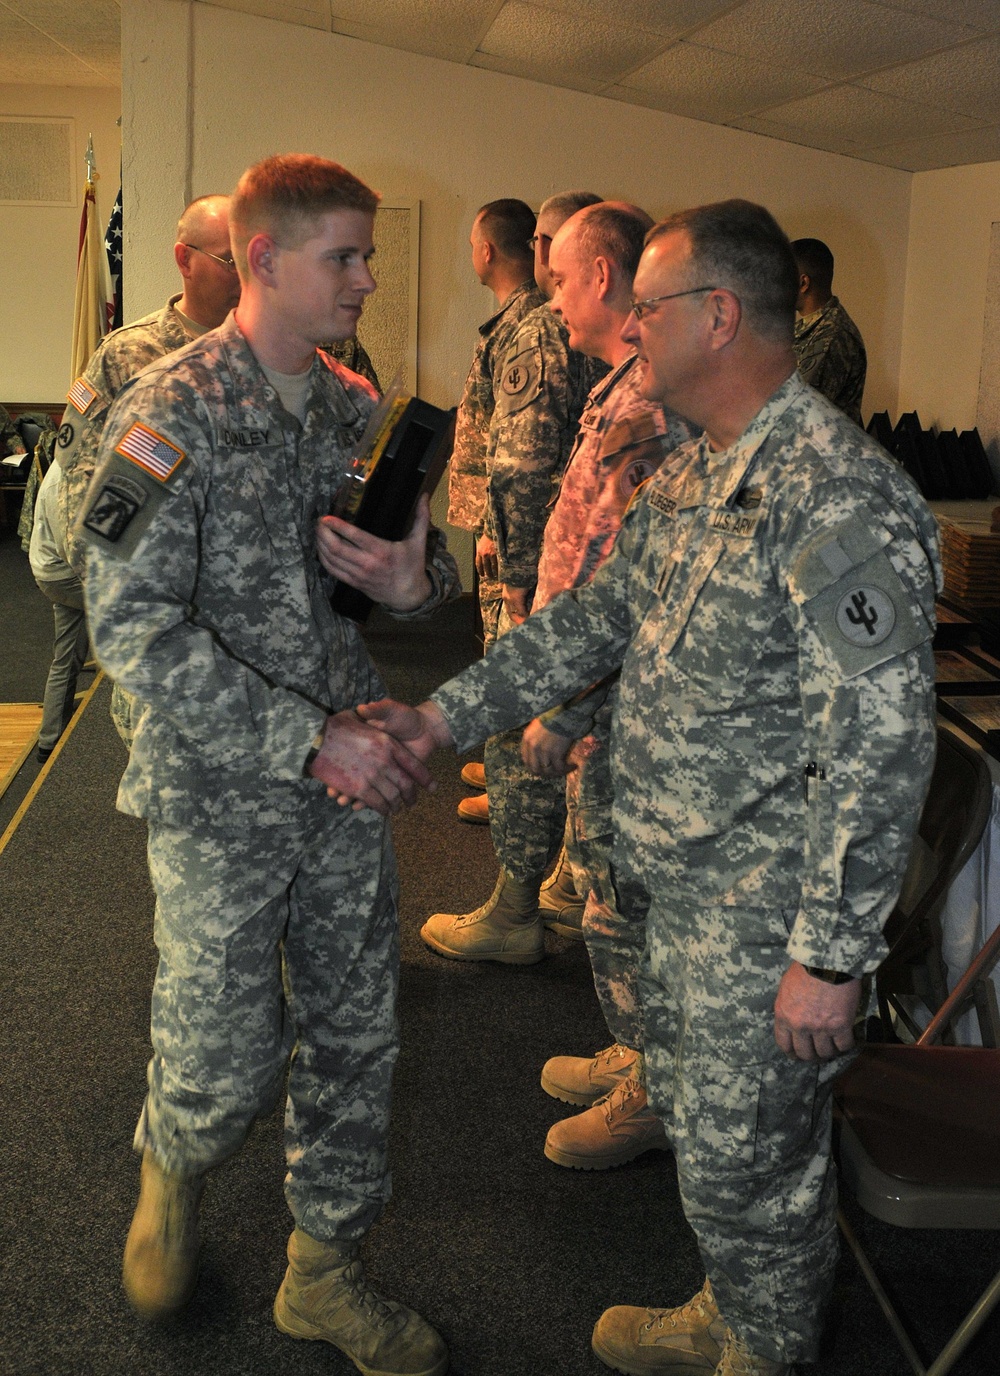 Soldiers of the 649th Regional Support Group of Cedar Rapids are presented with awards during a Warrior Welcome Home Ceremony